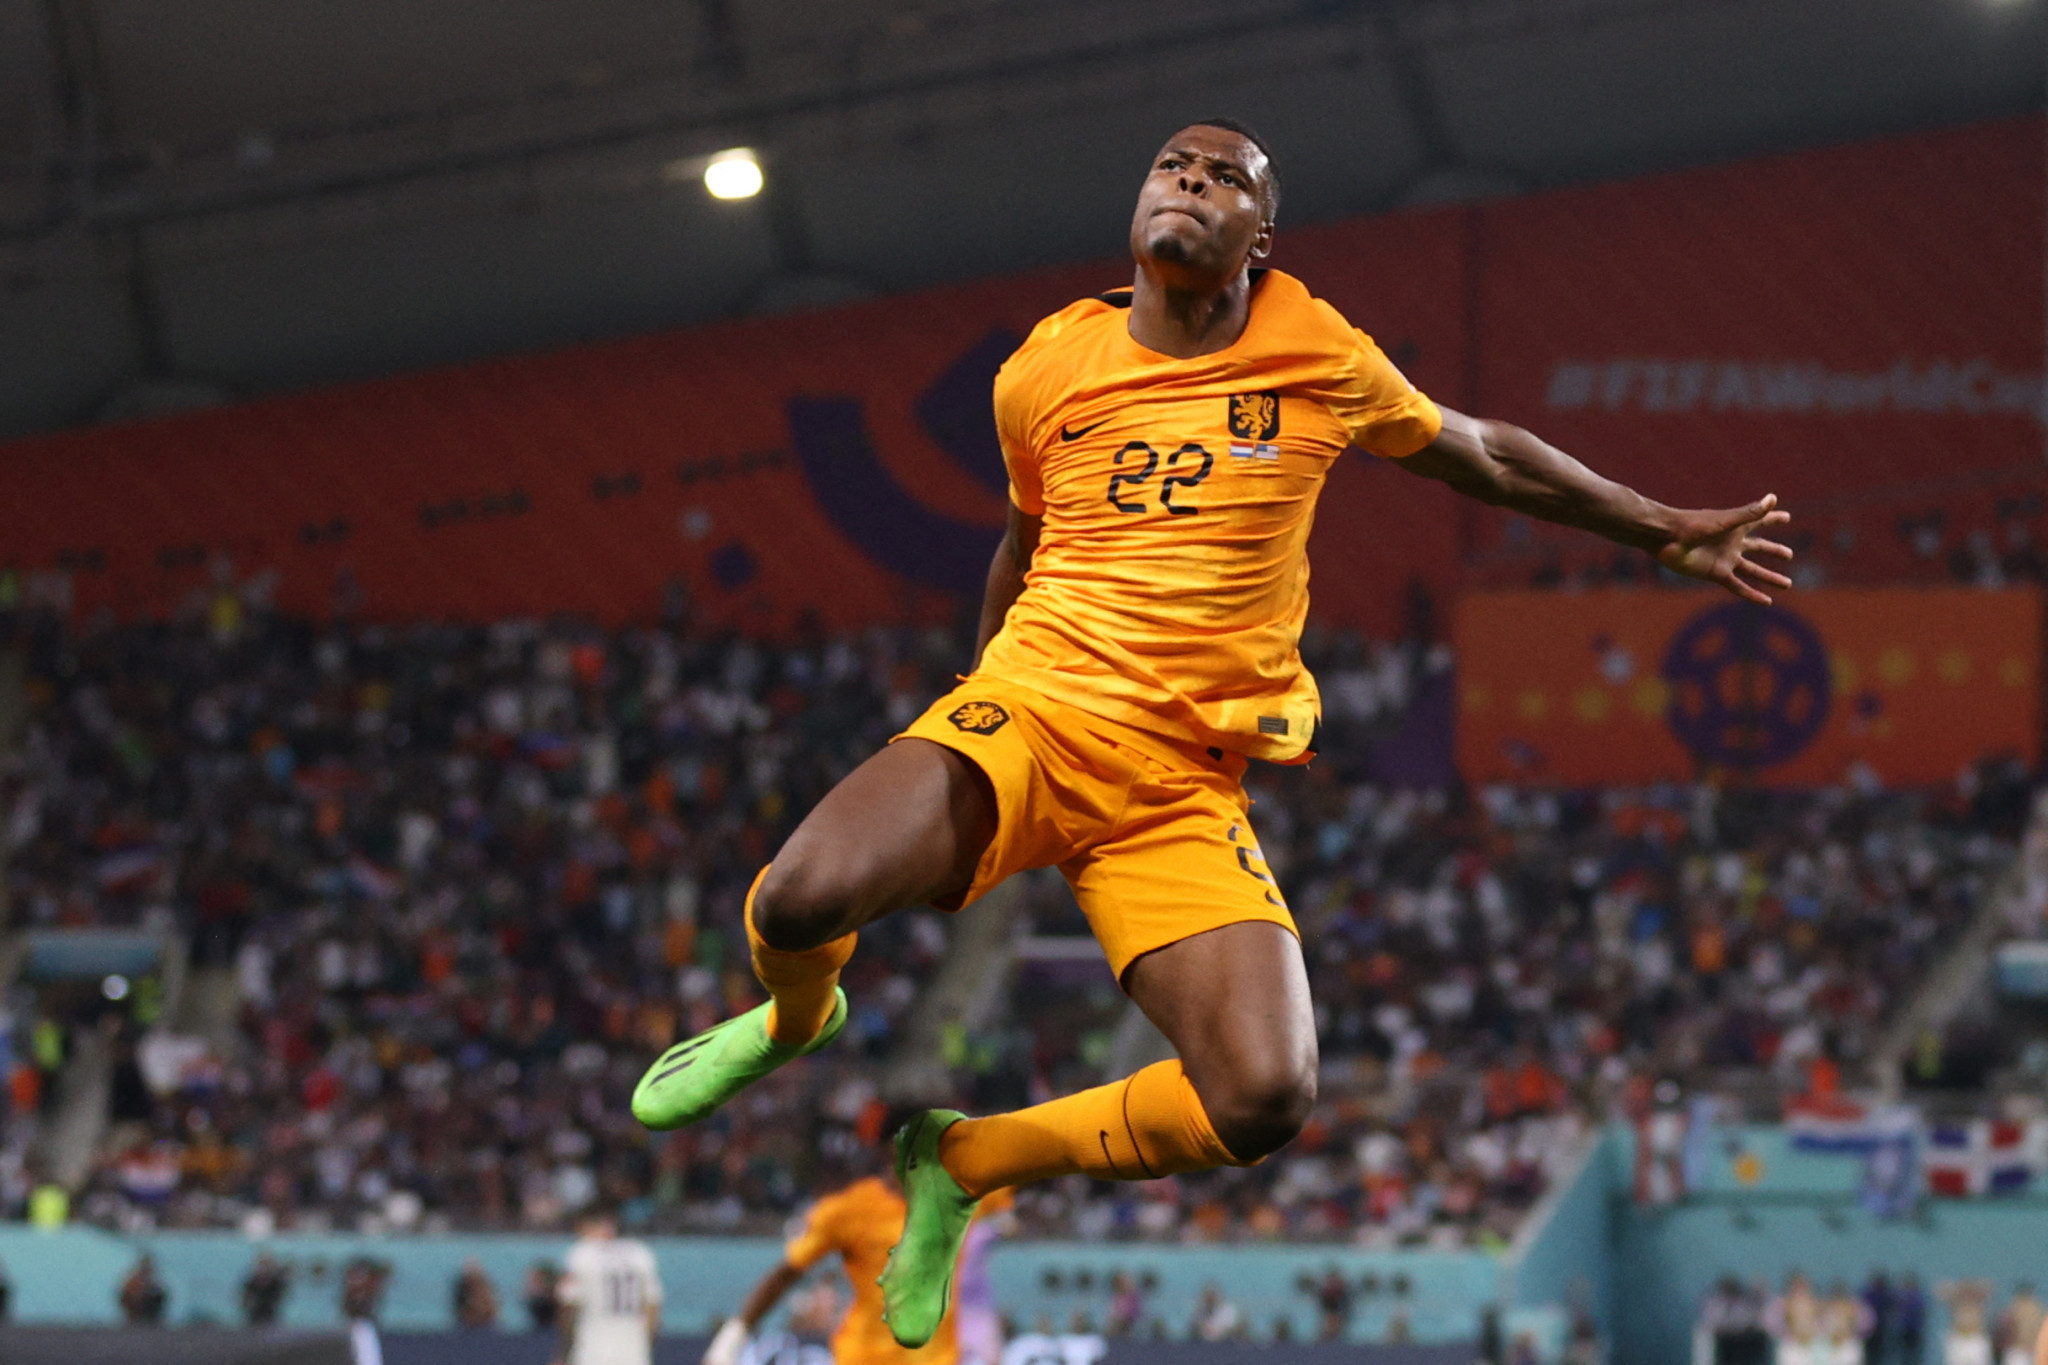 With two assists and one goal, Denzel Dumfries was the star man for The Netherlands ©Getty Images